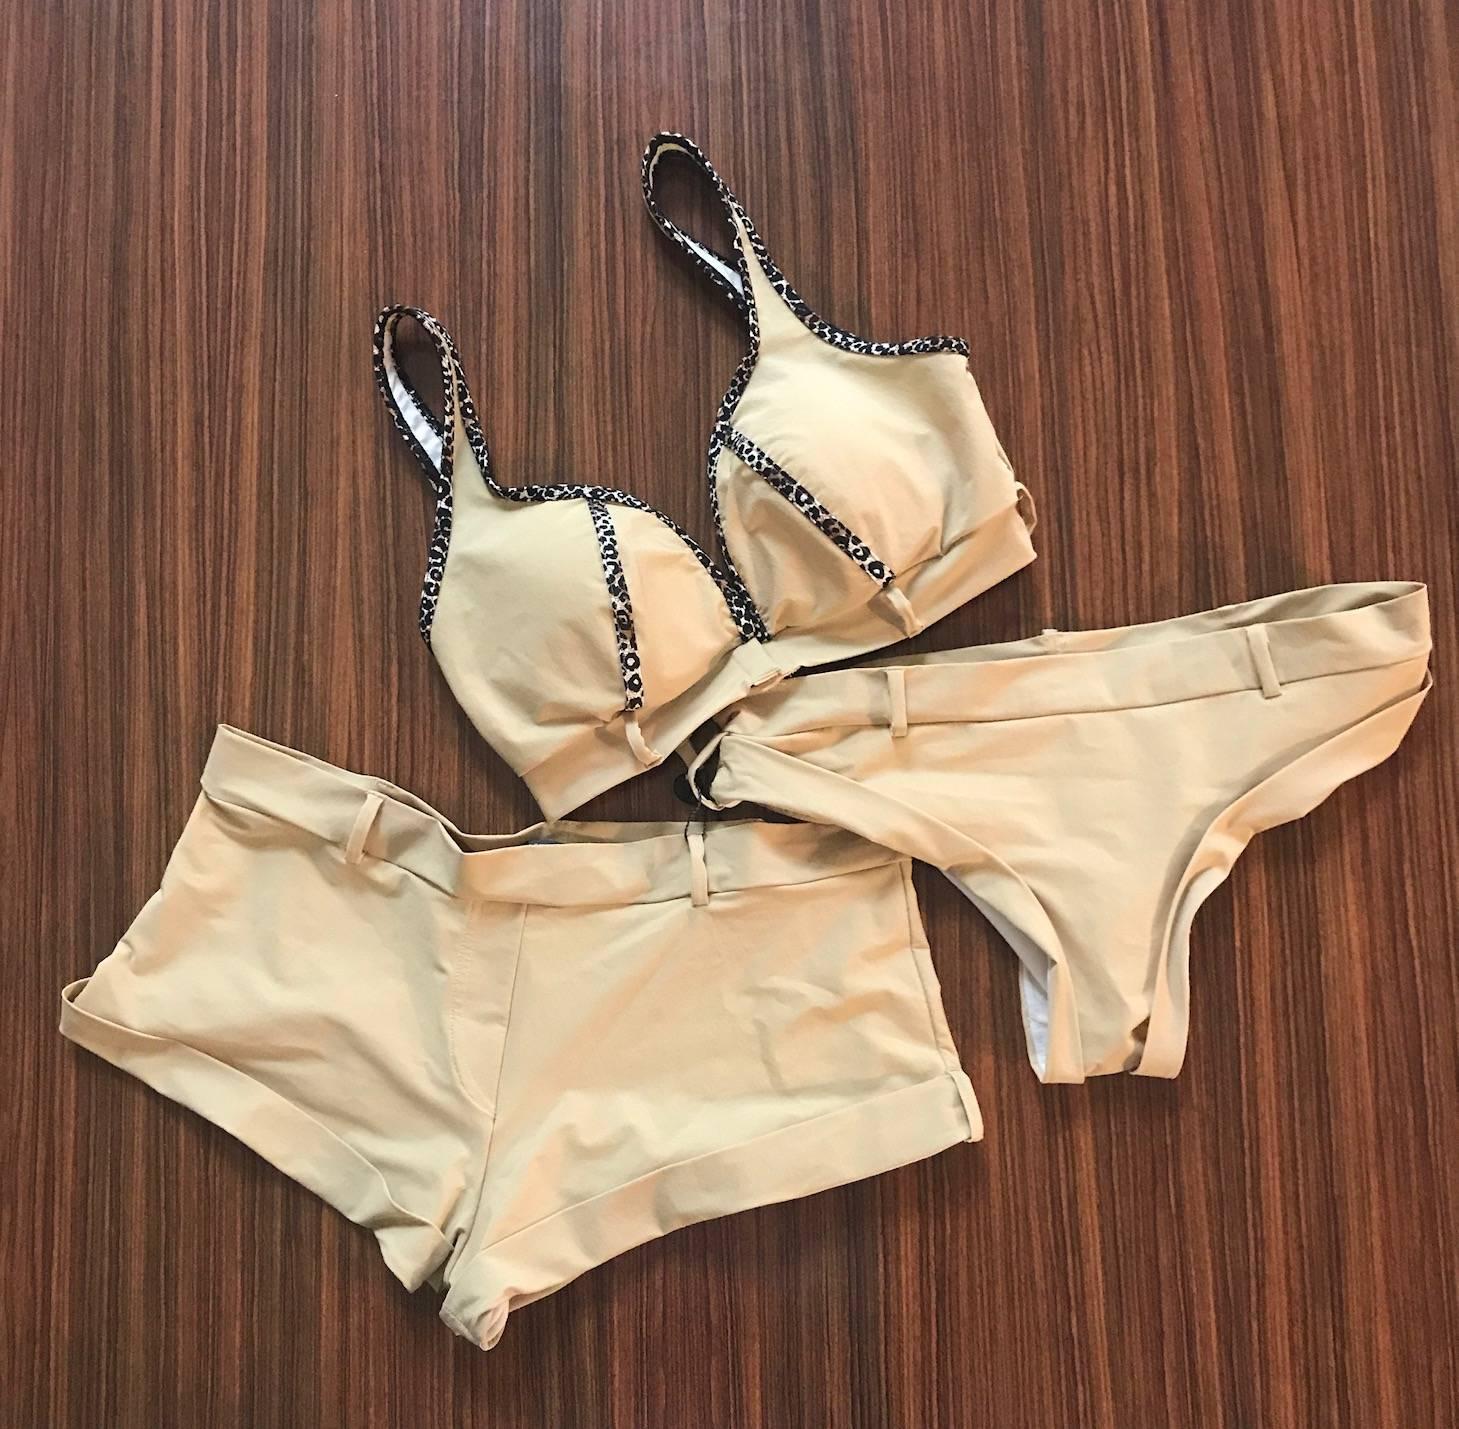 Alexander McQueen three piece bikini produced as Spring/Summer 2005 production sample. Very rare, may have never made it into actual production!
 
One top and two bottoms (one standard bikini, one boy short.) Top features leopard print trim, belt